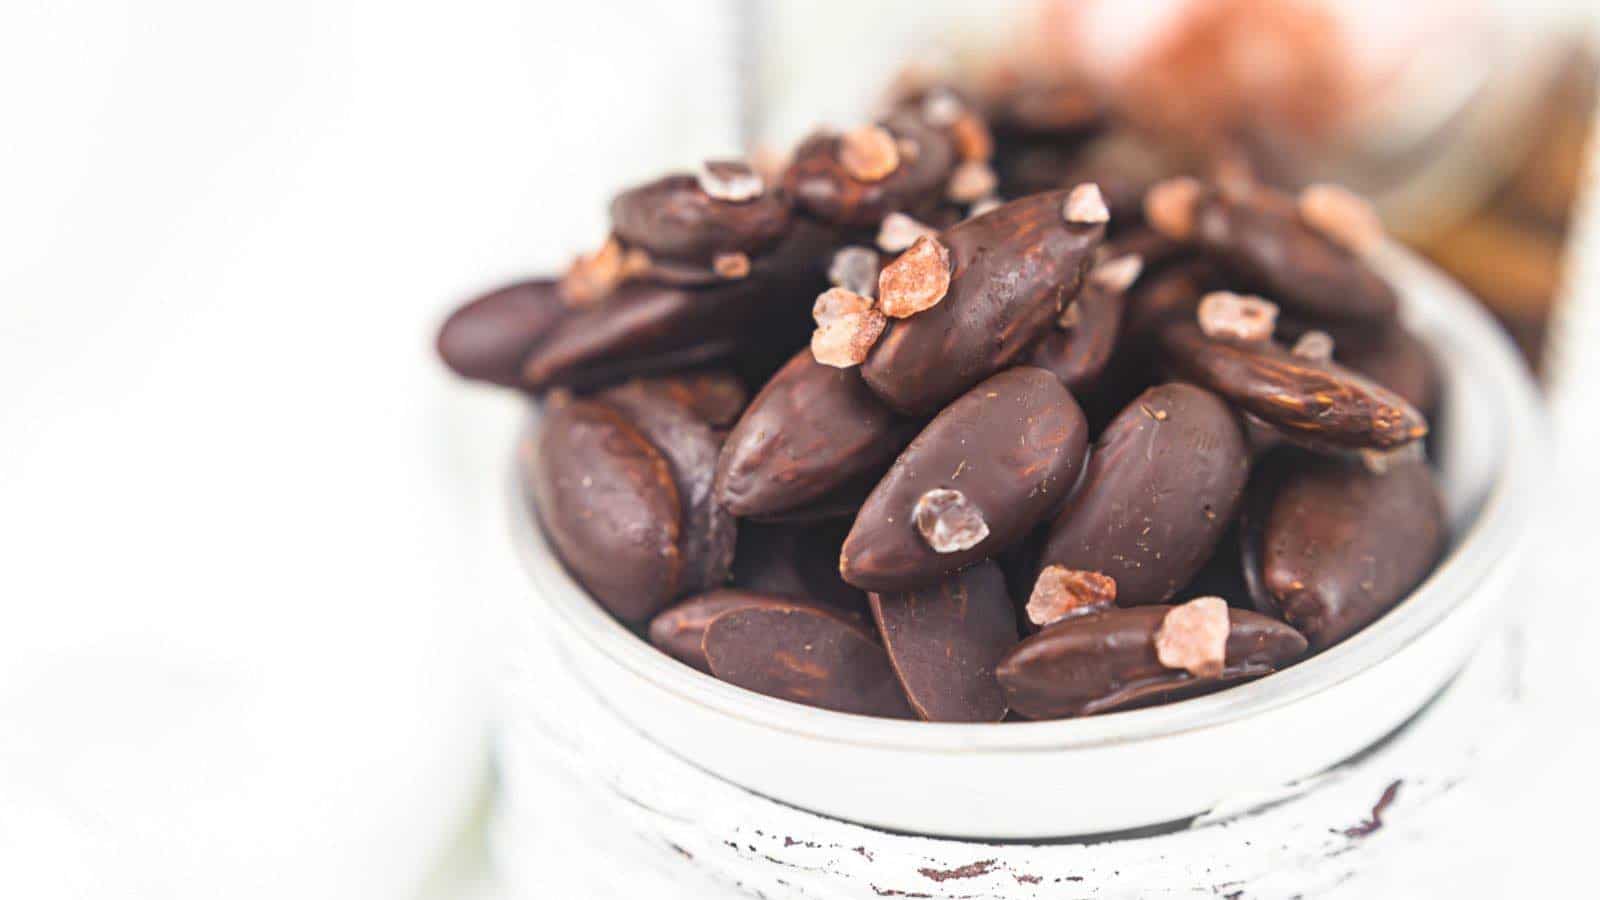 Chocolate covered almonds in a jar on a white table.